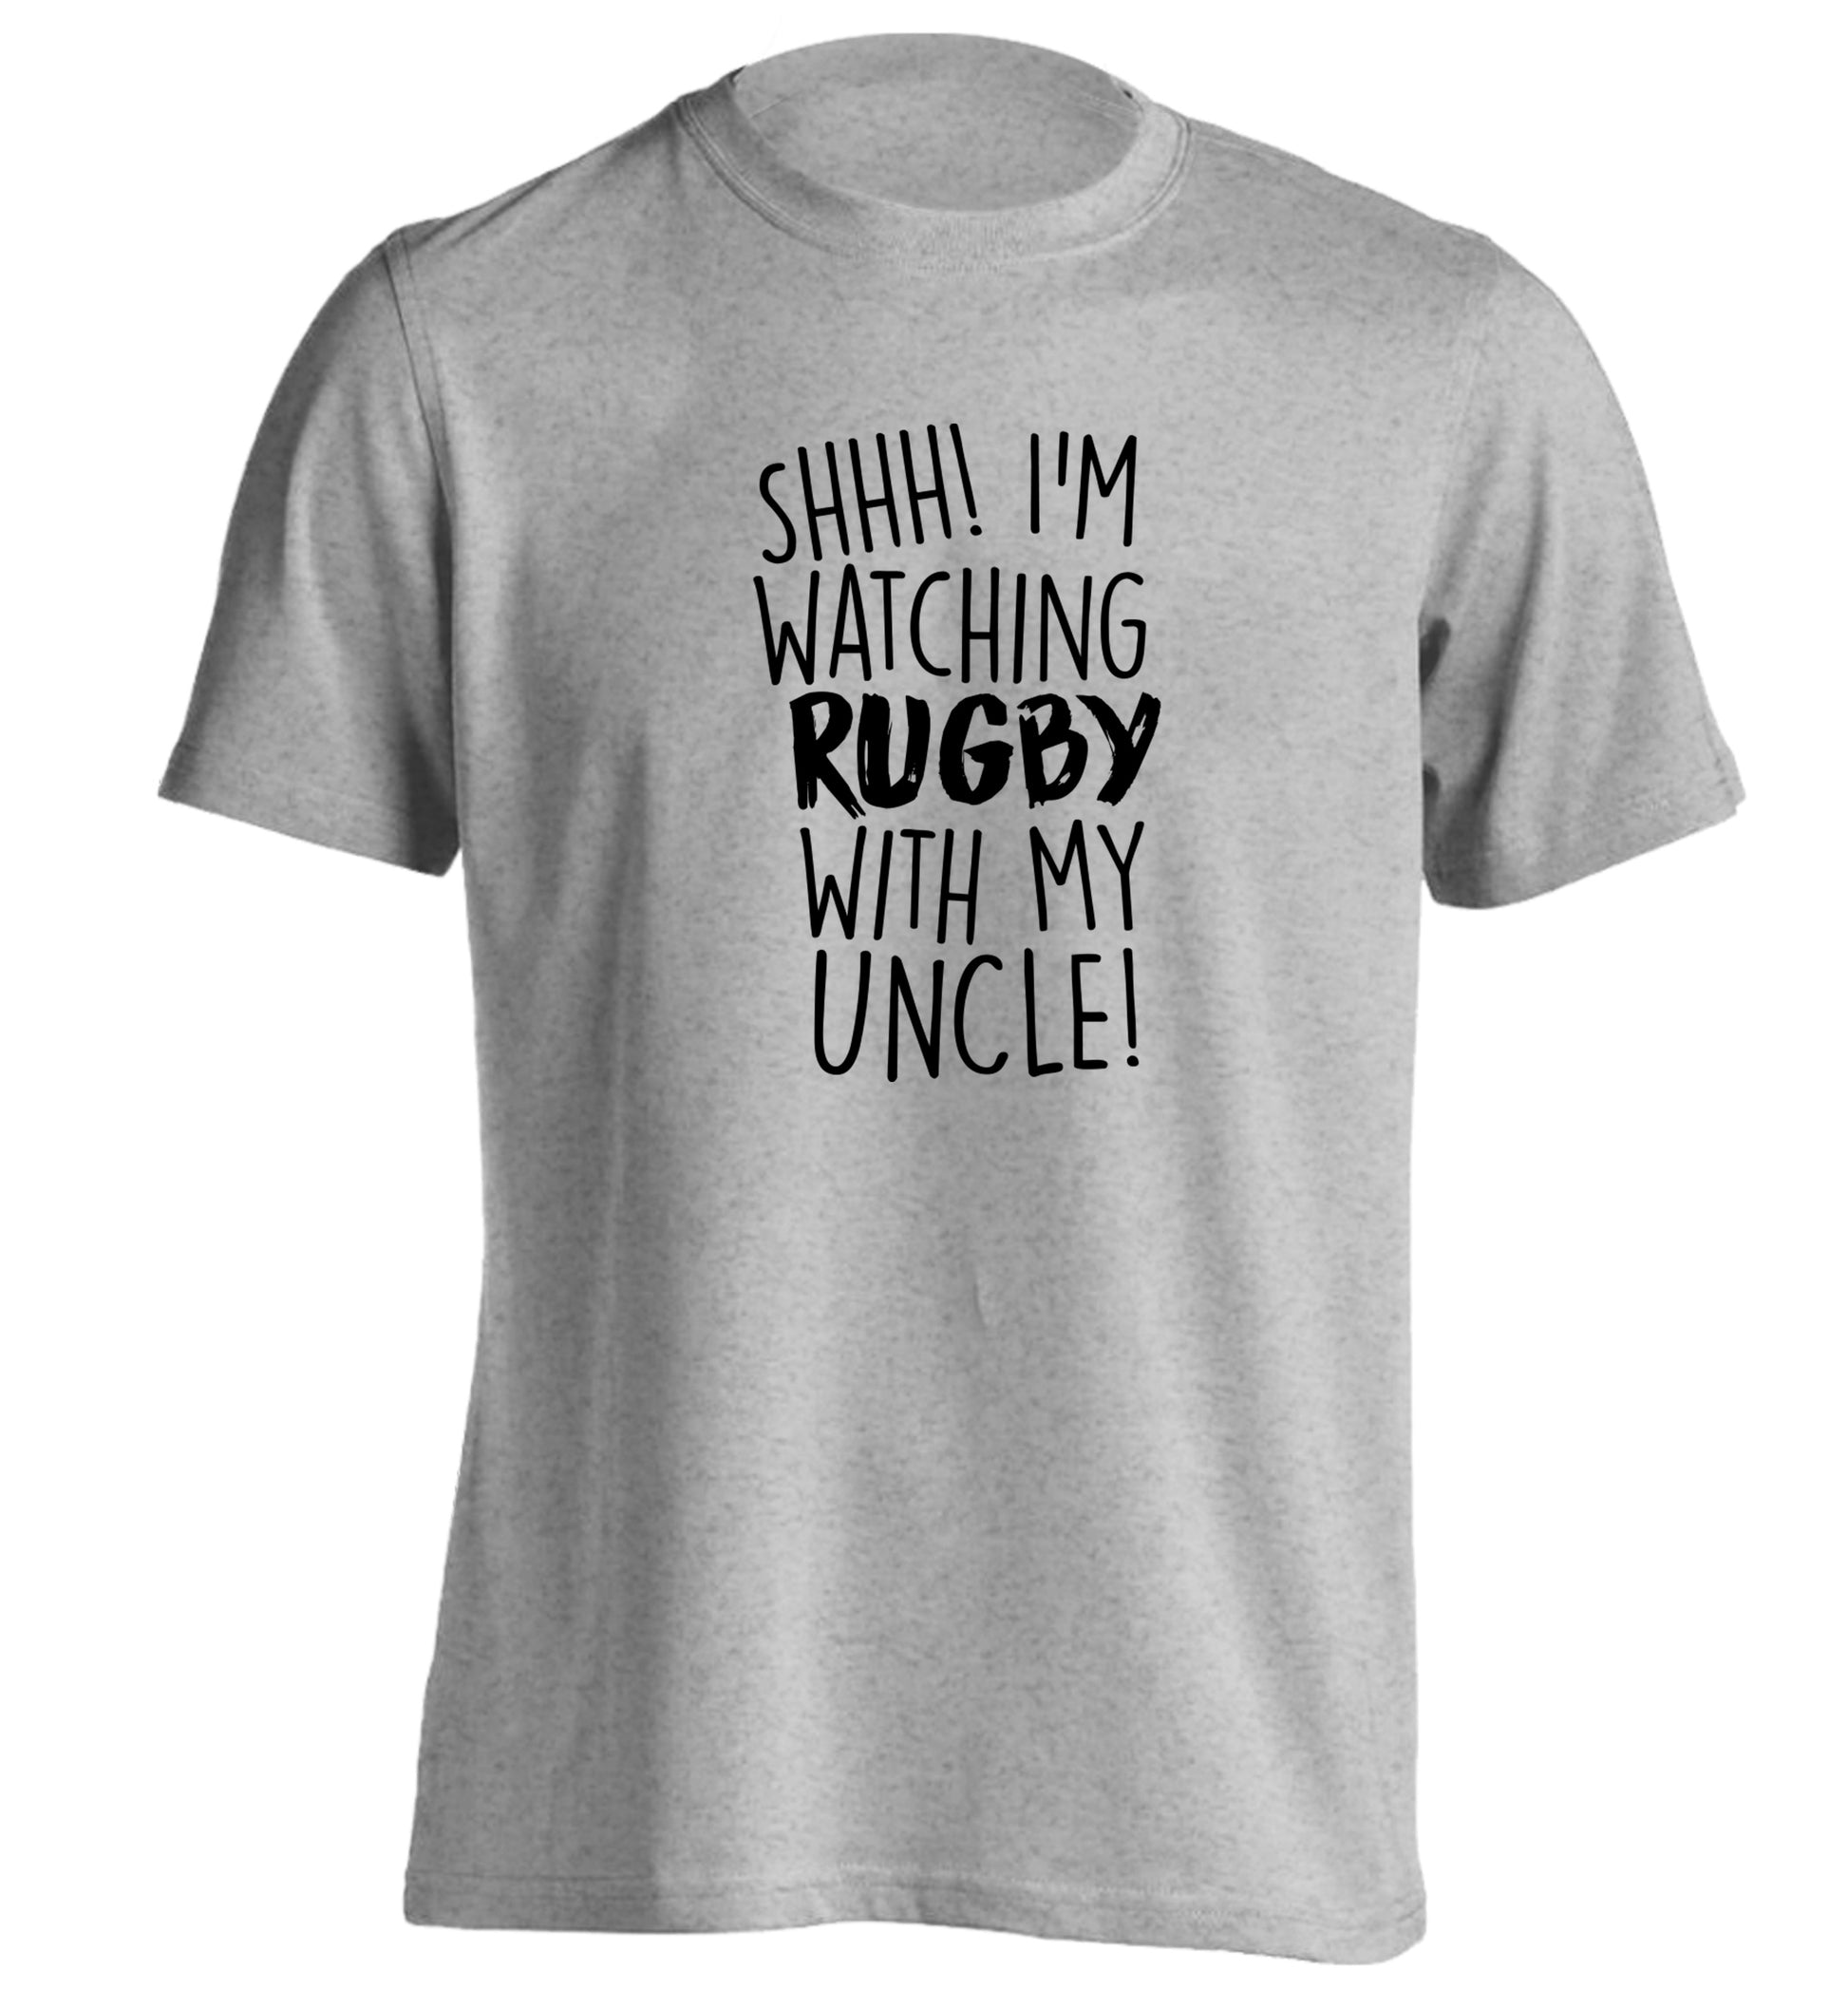 Shh.. I'm watching rugby with my uncle adults unisex grey Tshirt 2XL